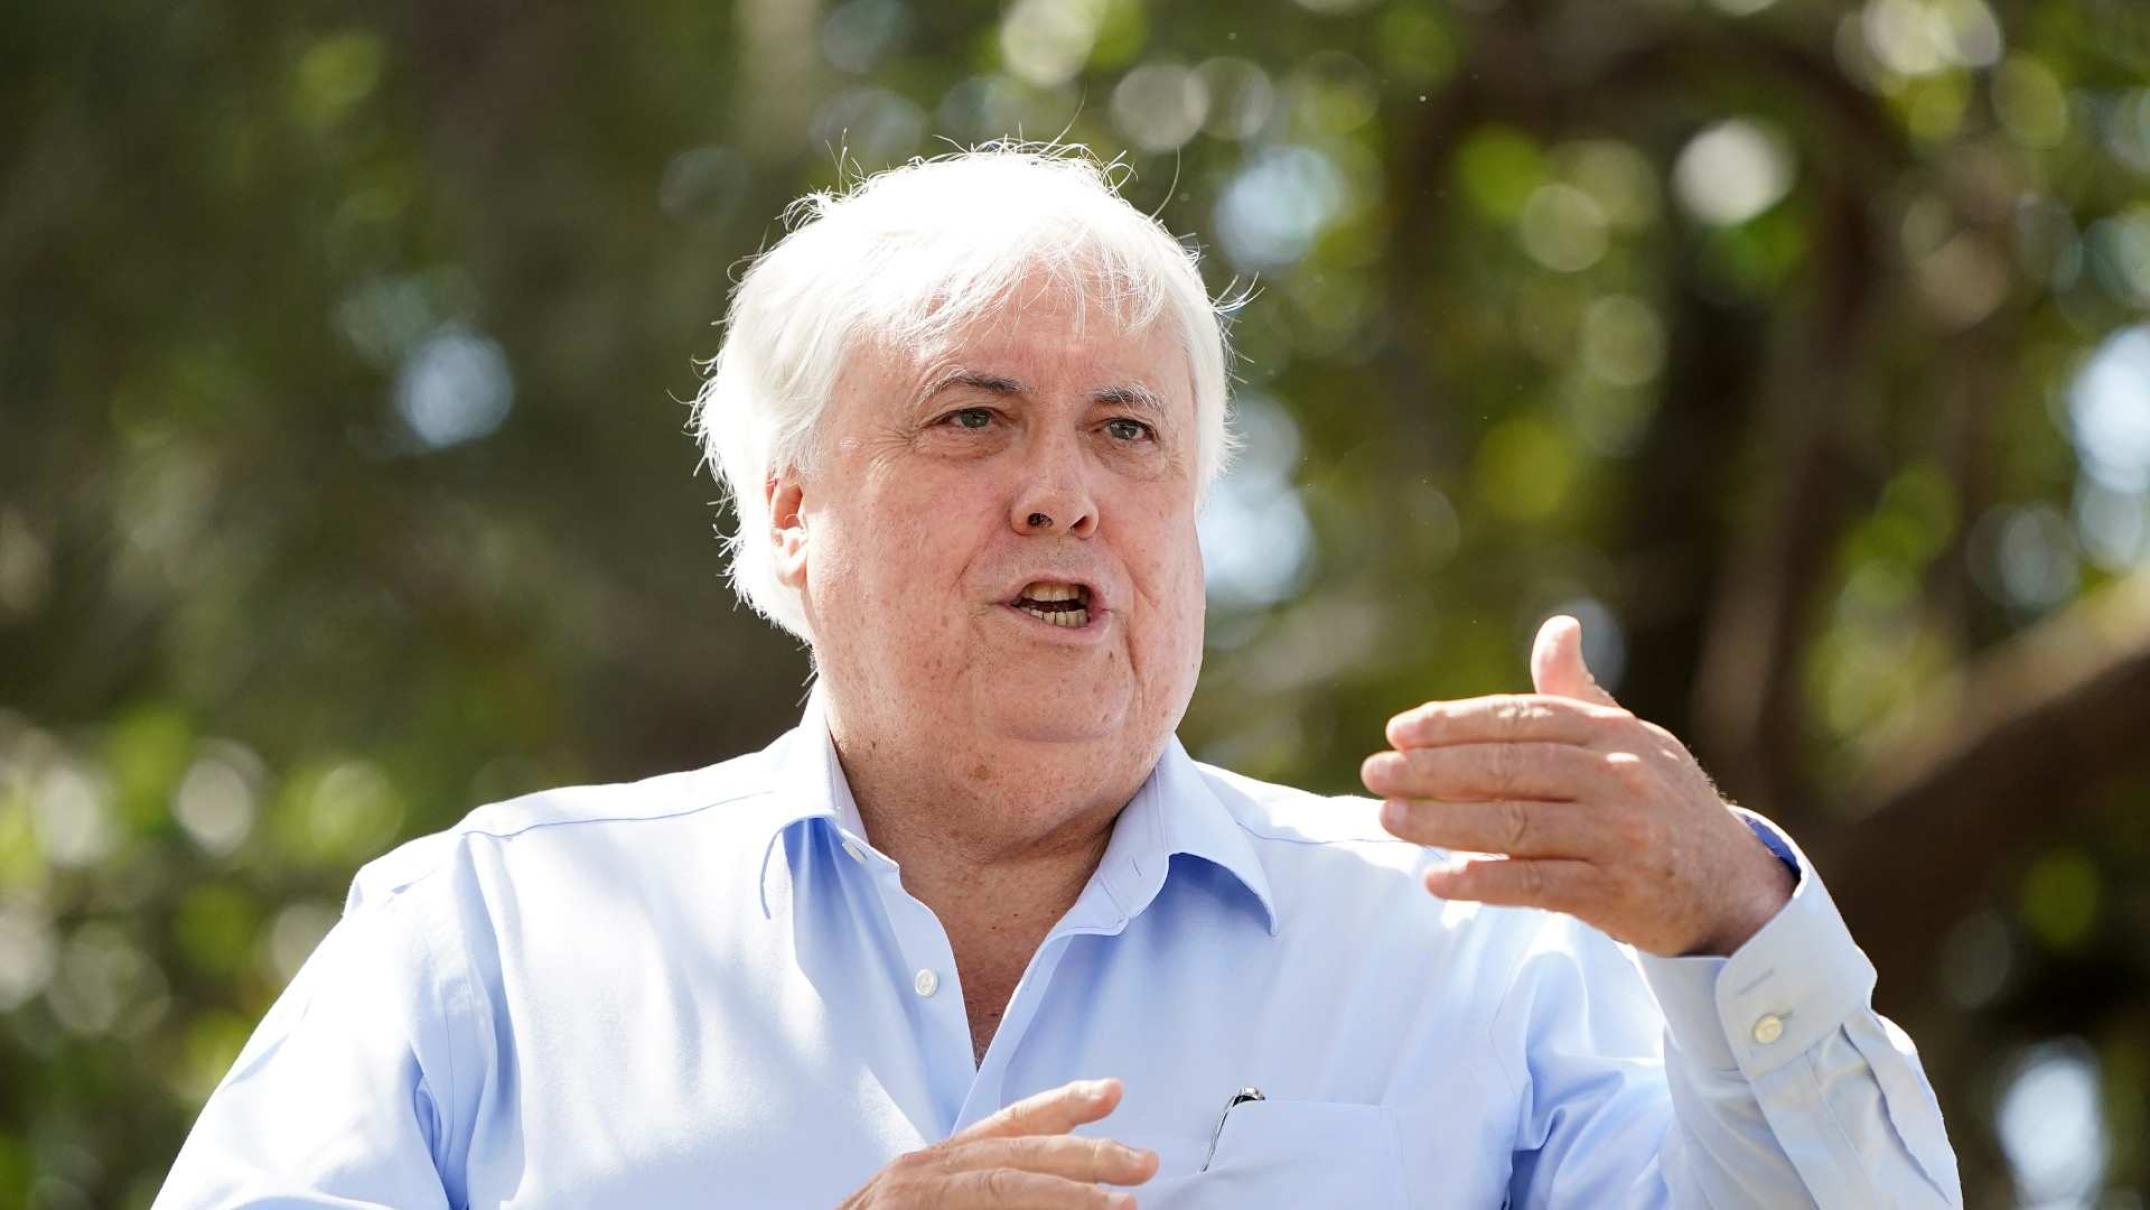 clive-palmer’s-queensland-coal-mine-plan-poses-‘significant-risks’-to-great-barrier-reef